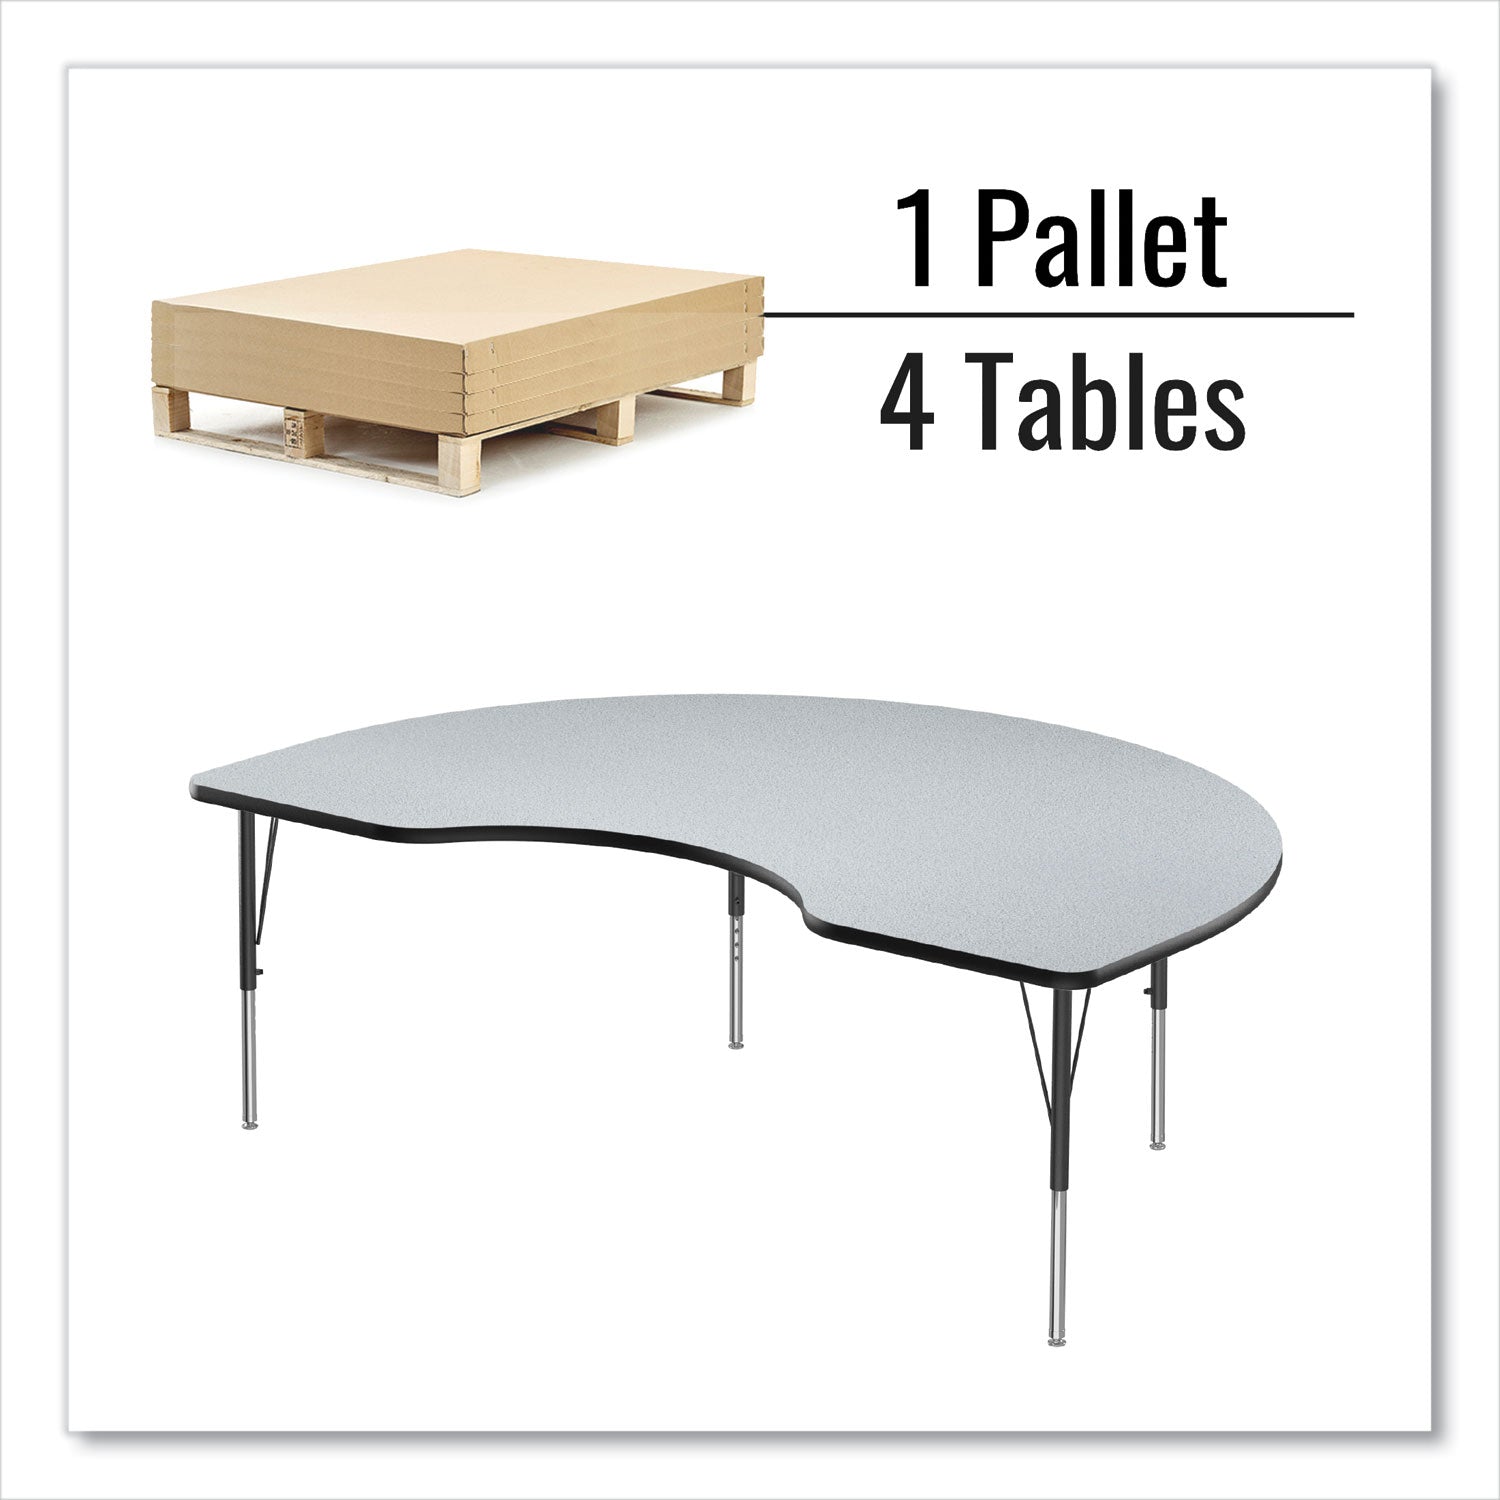 adjustable-activity-tables-kidney-shaped-72-x-48-x-19-to-29-gray-top-black-legs-4-pallet-ships-in-4-6-business-days_crl4872tf1595k4 - 2